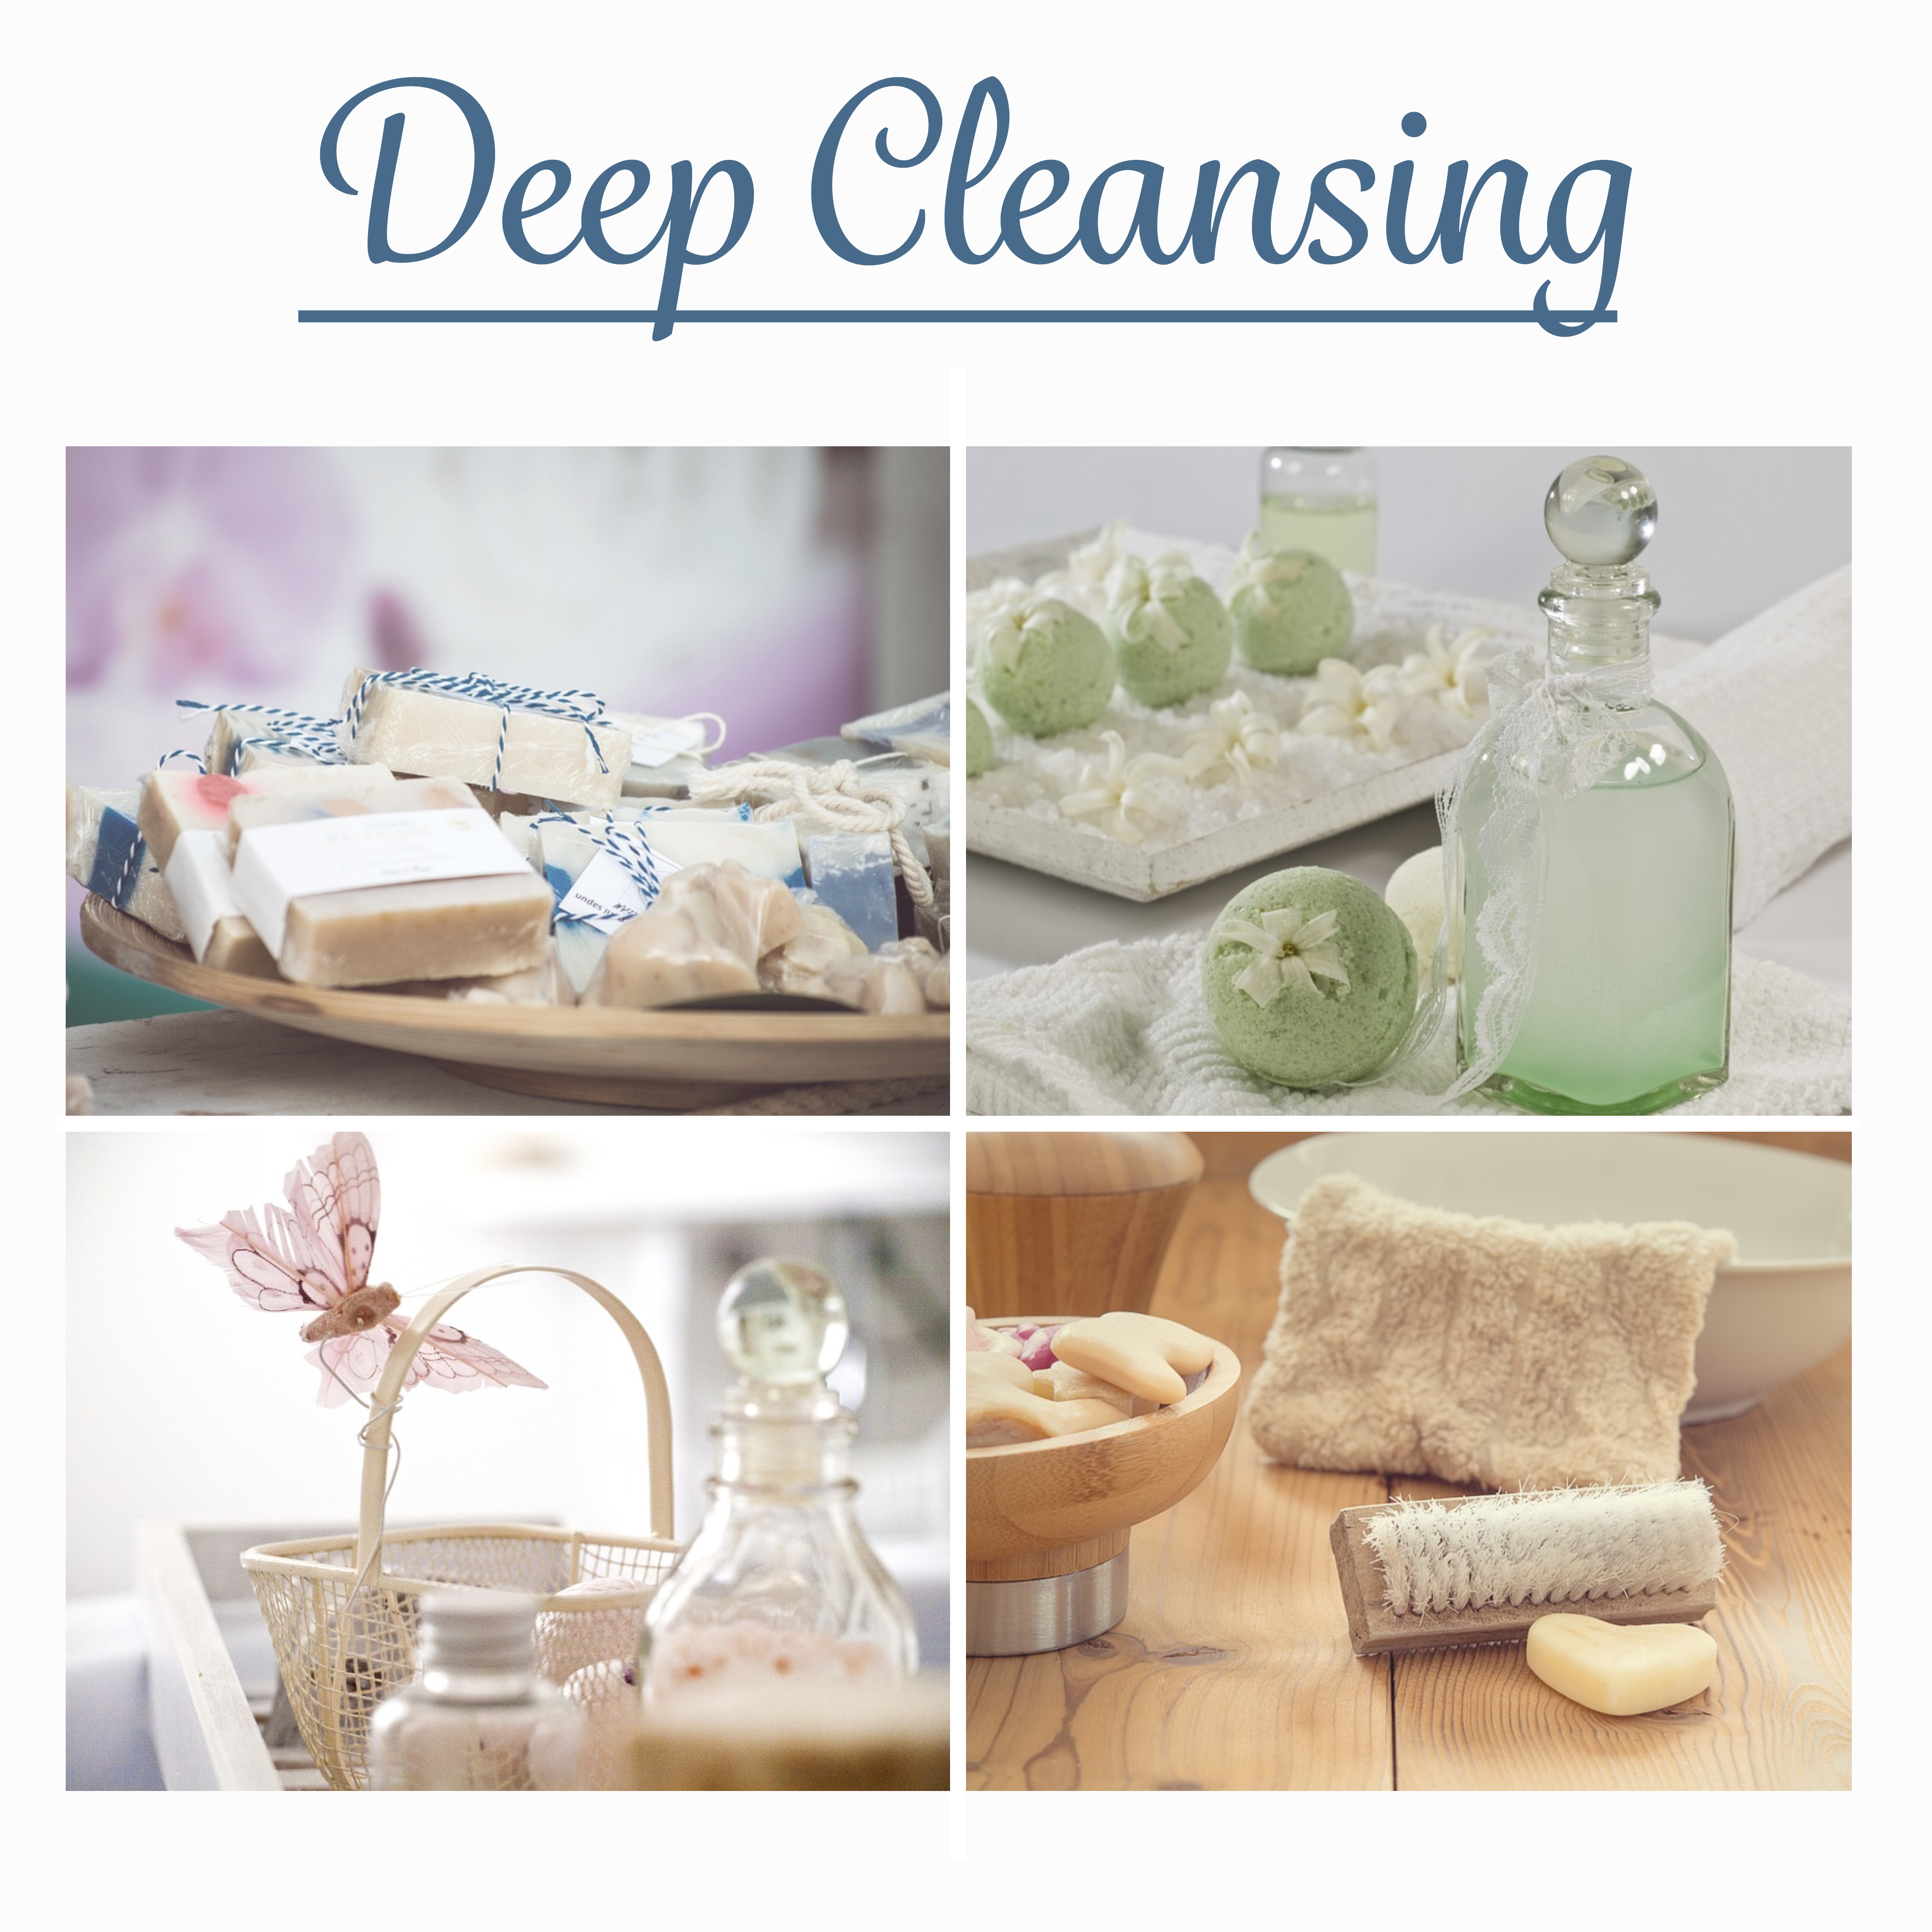 Deep Cleansing - Glow Skin, Calmness, Delicate Touch, Pure Mind, New Energy